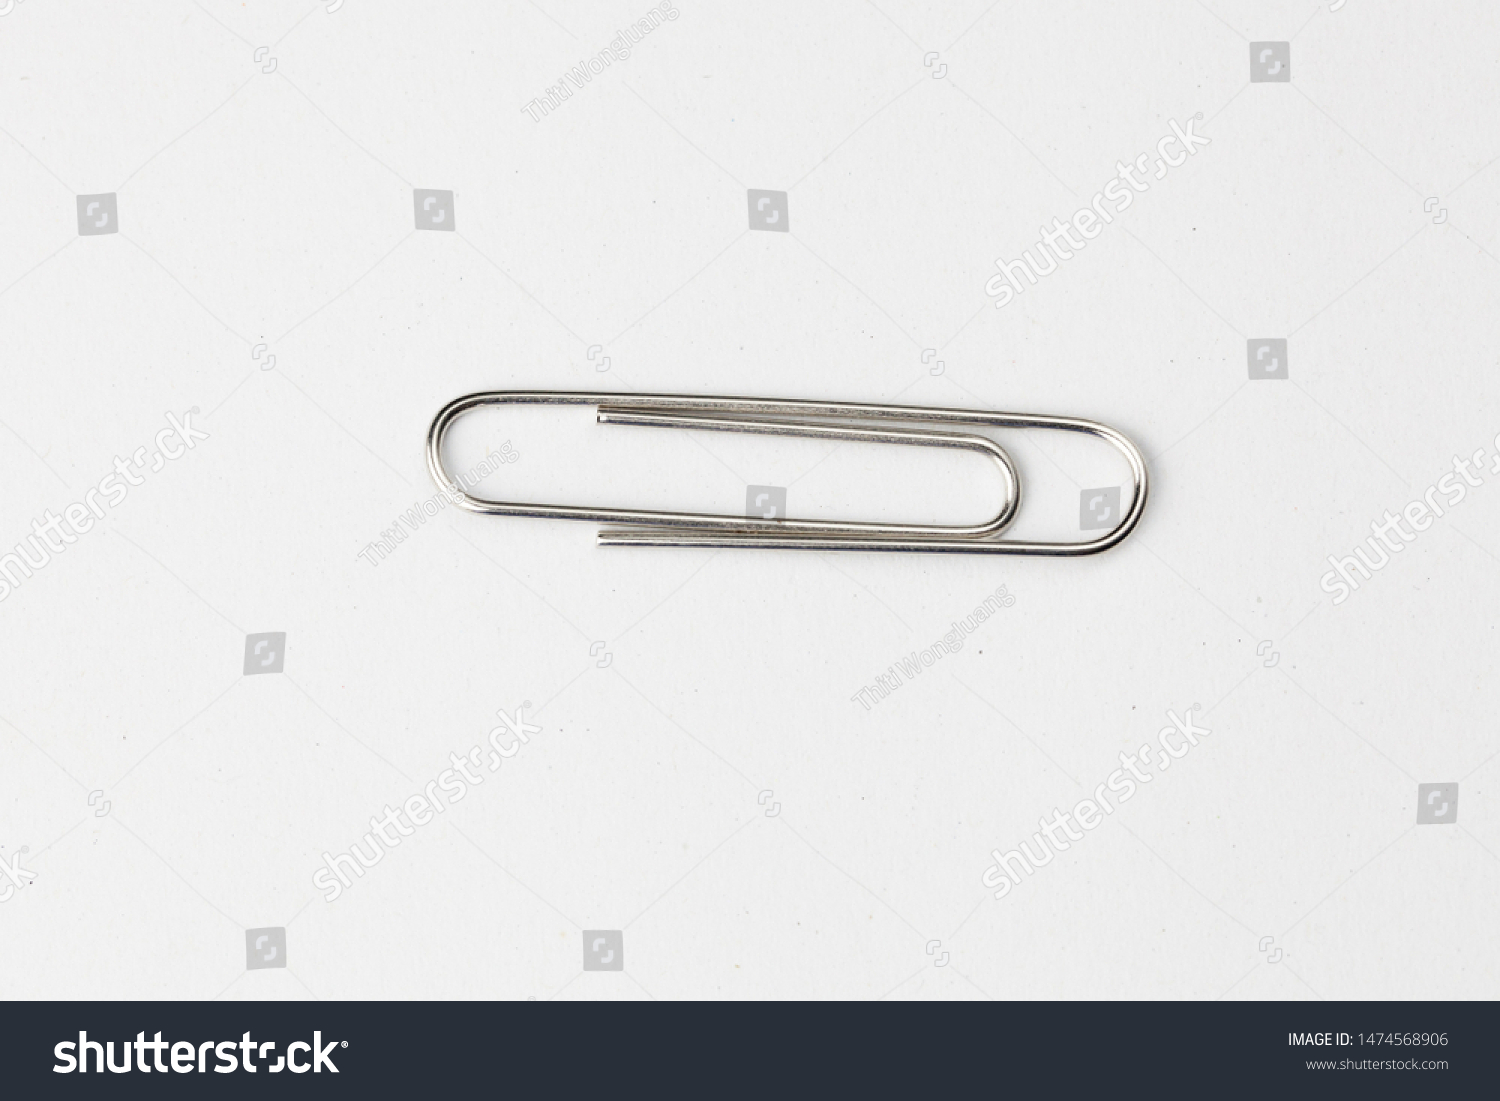 Metal paper clip isolated on white background #1474568906